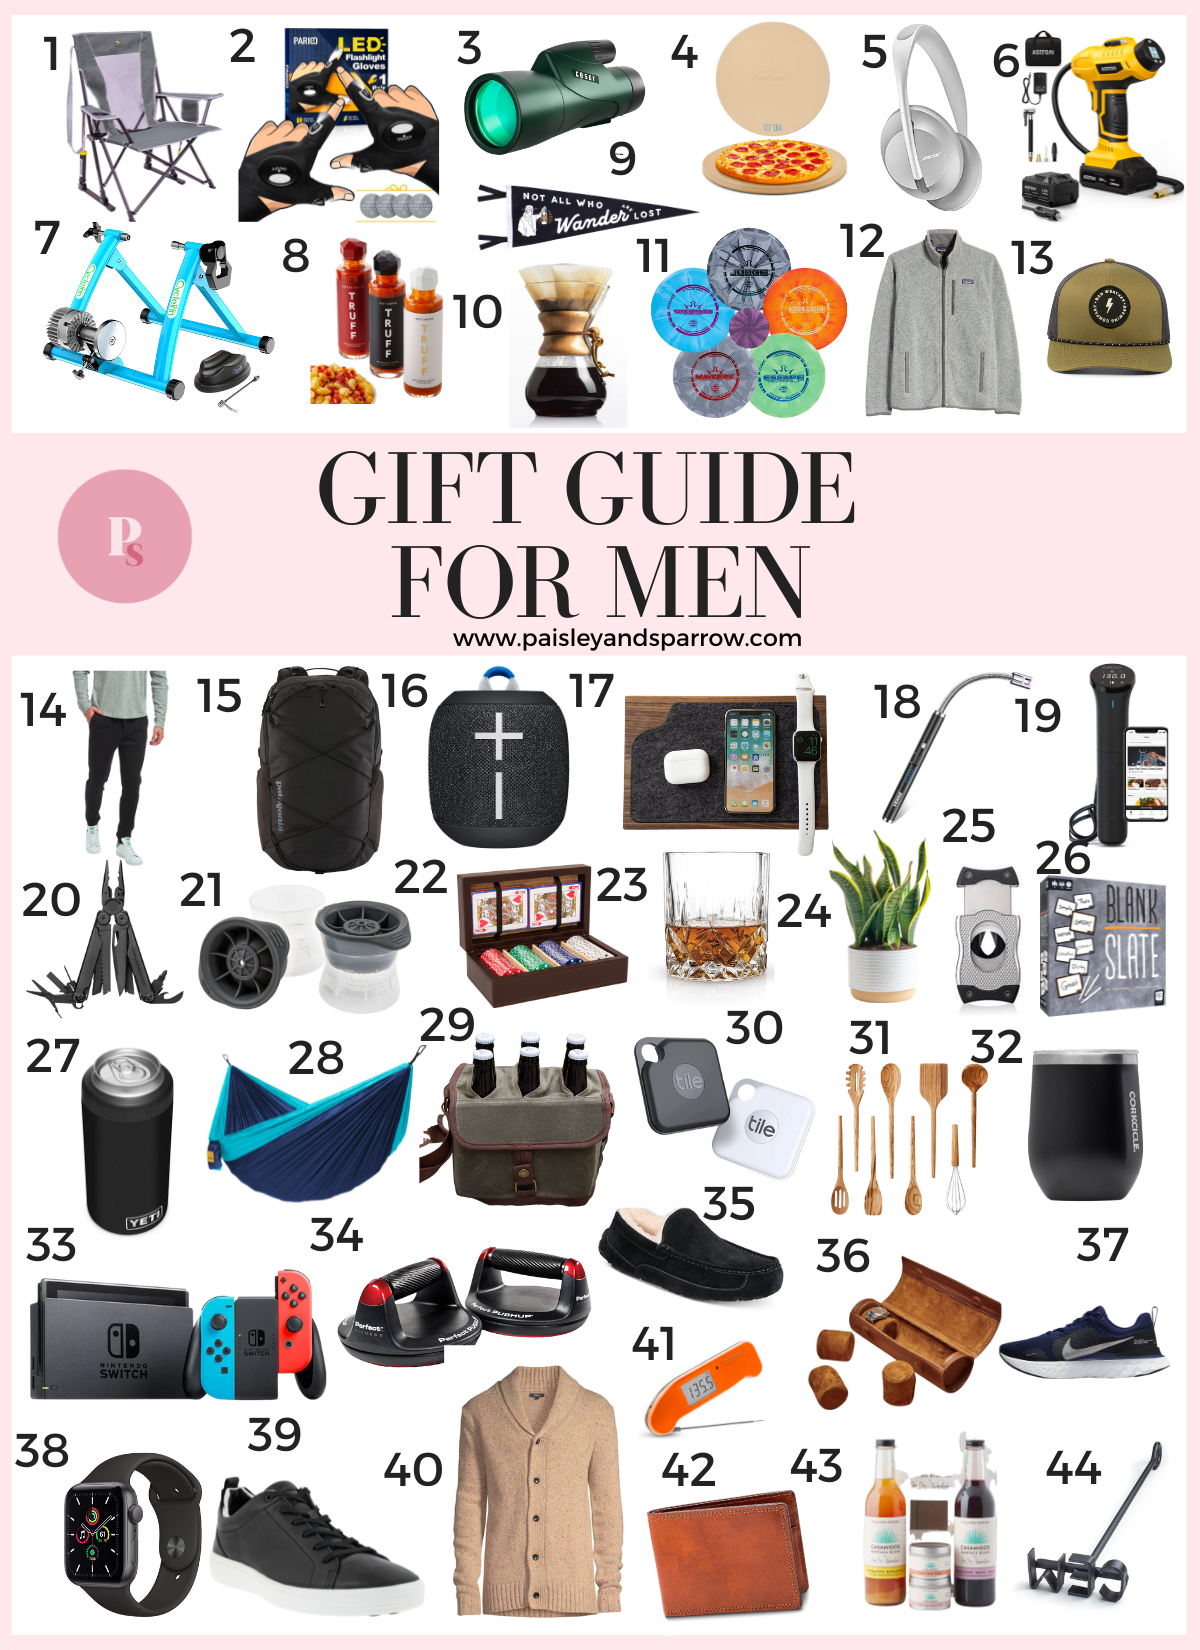 50 Gift Ideas for 12-Year-Old Boys That They Actually Like